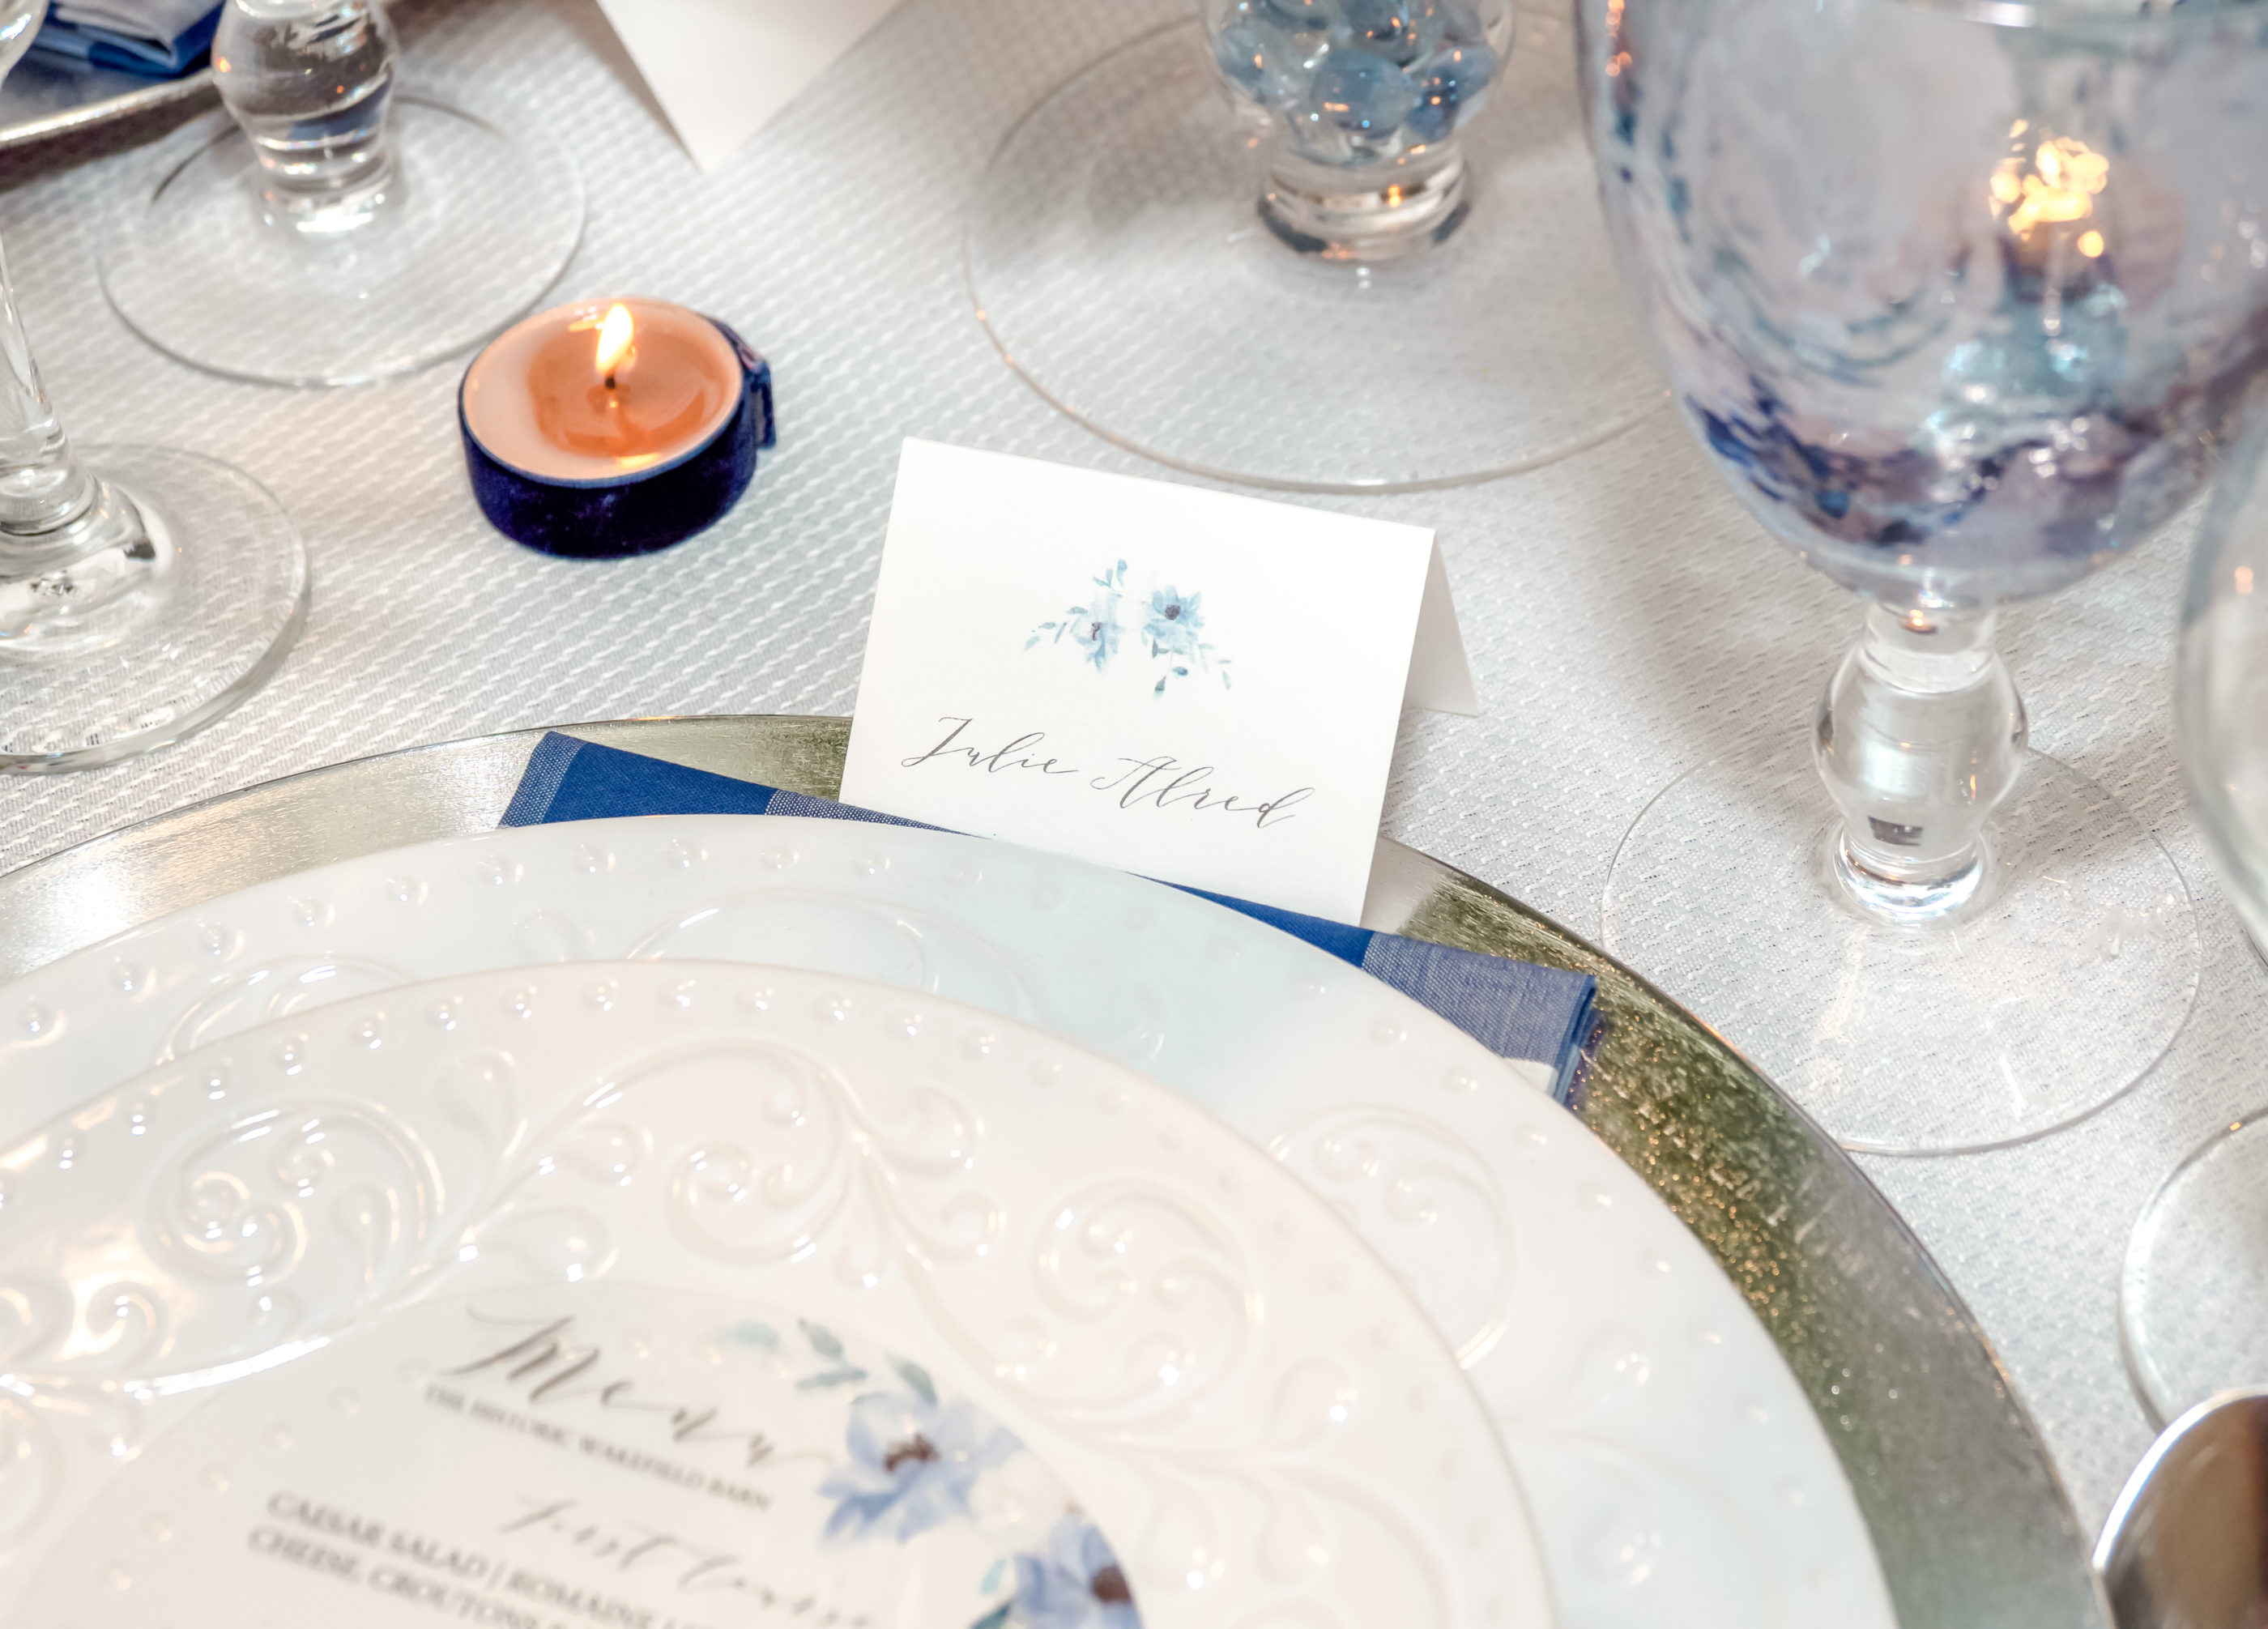 name card on reception table with guest's name at place setting